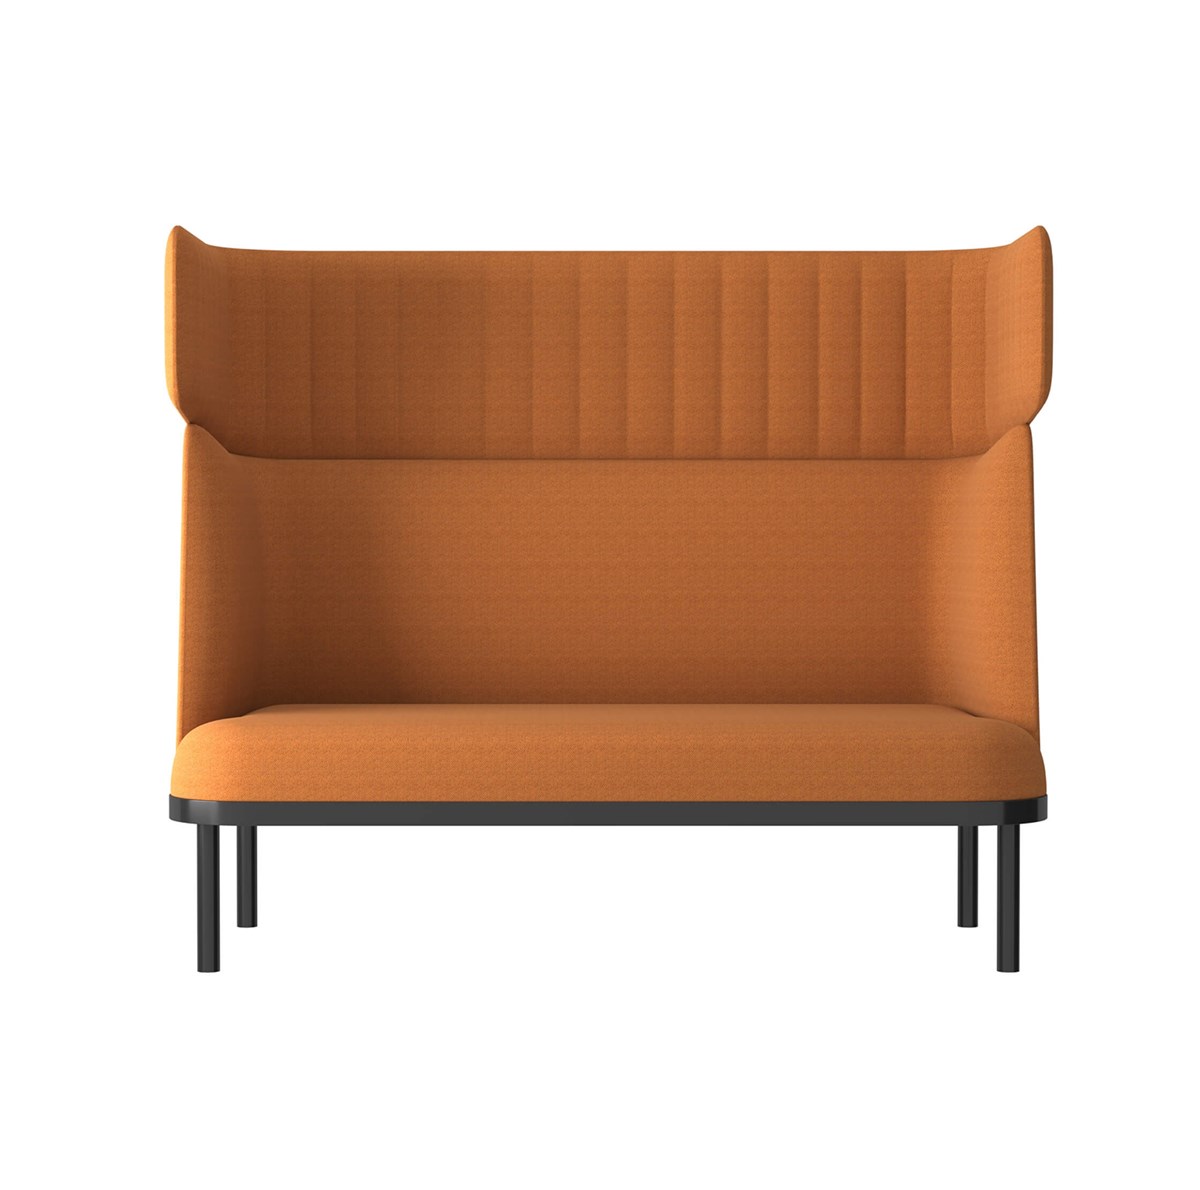 Neospace-Dwell-Sofa-High-Back-Contract-Matisse-2